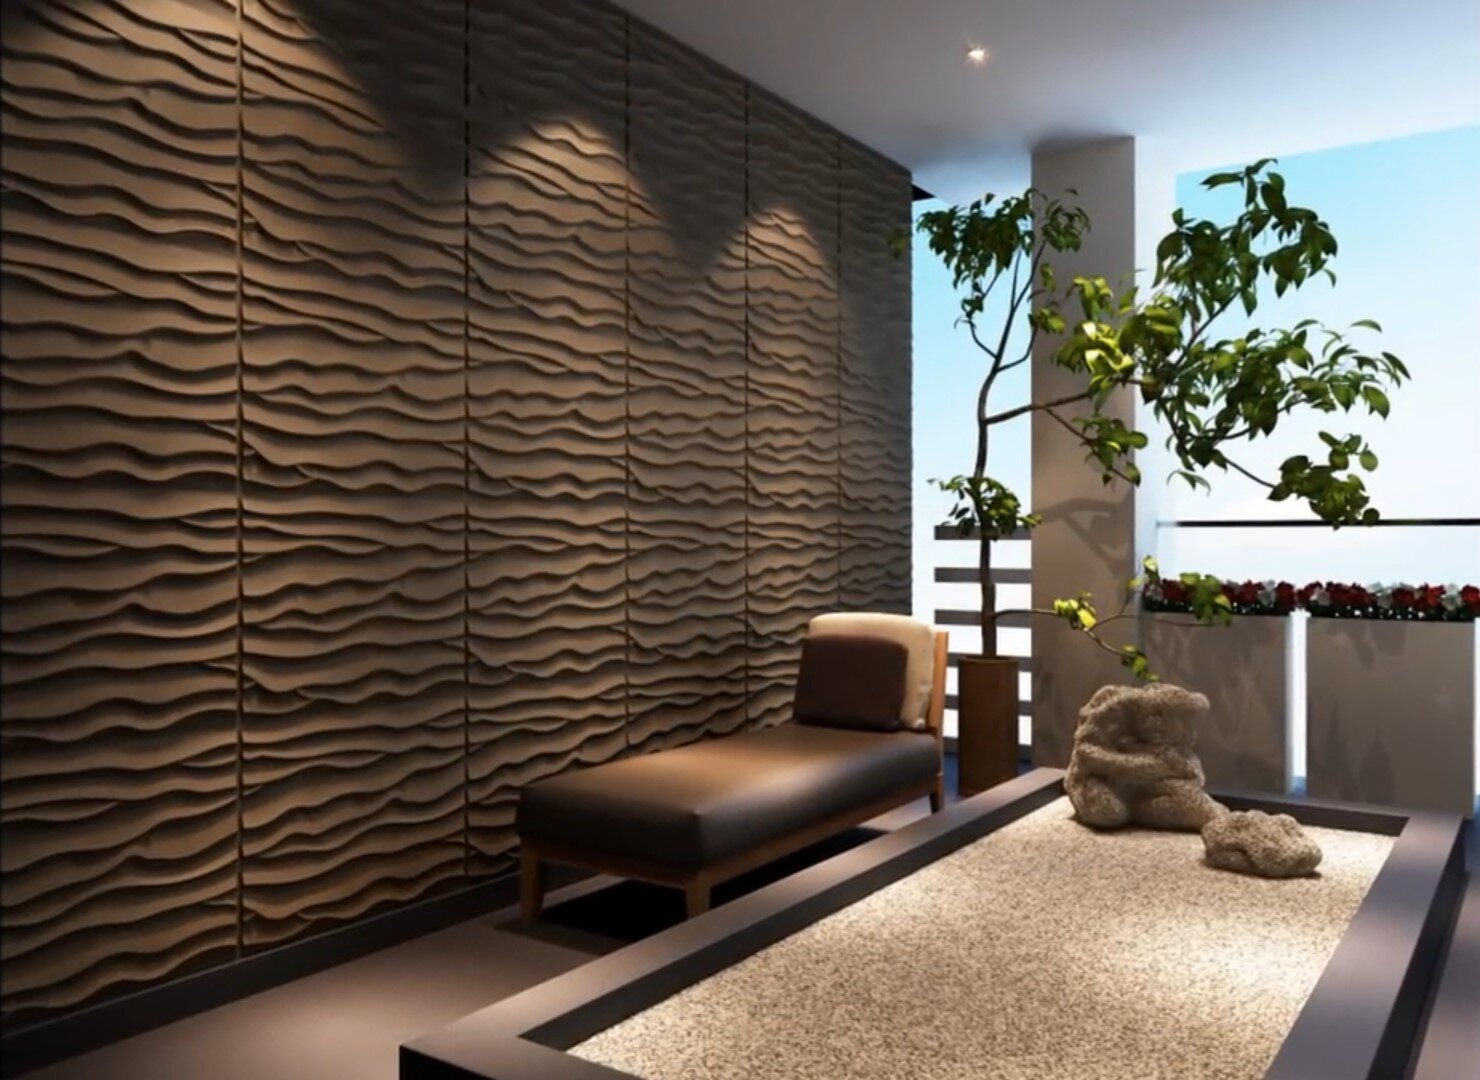 Accent Wall Ideas Beyond The Ordinary - Reflect Your Personal Style 00026.jpg